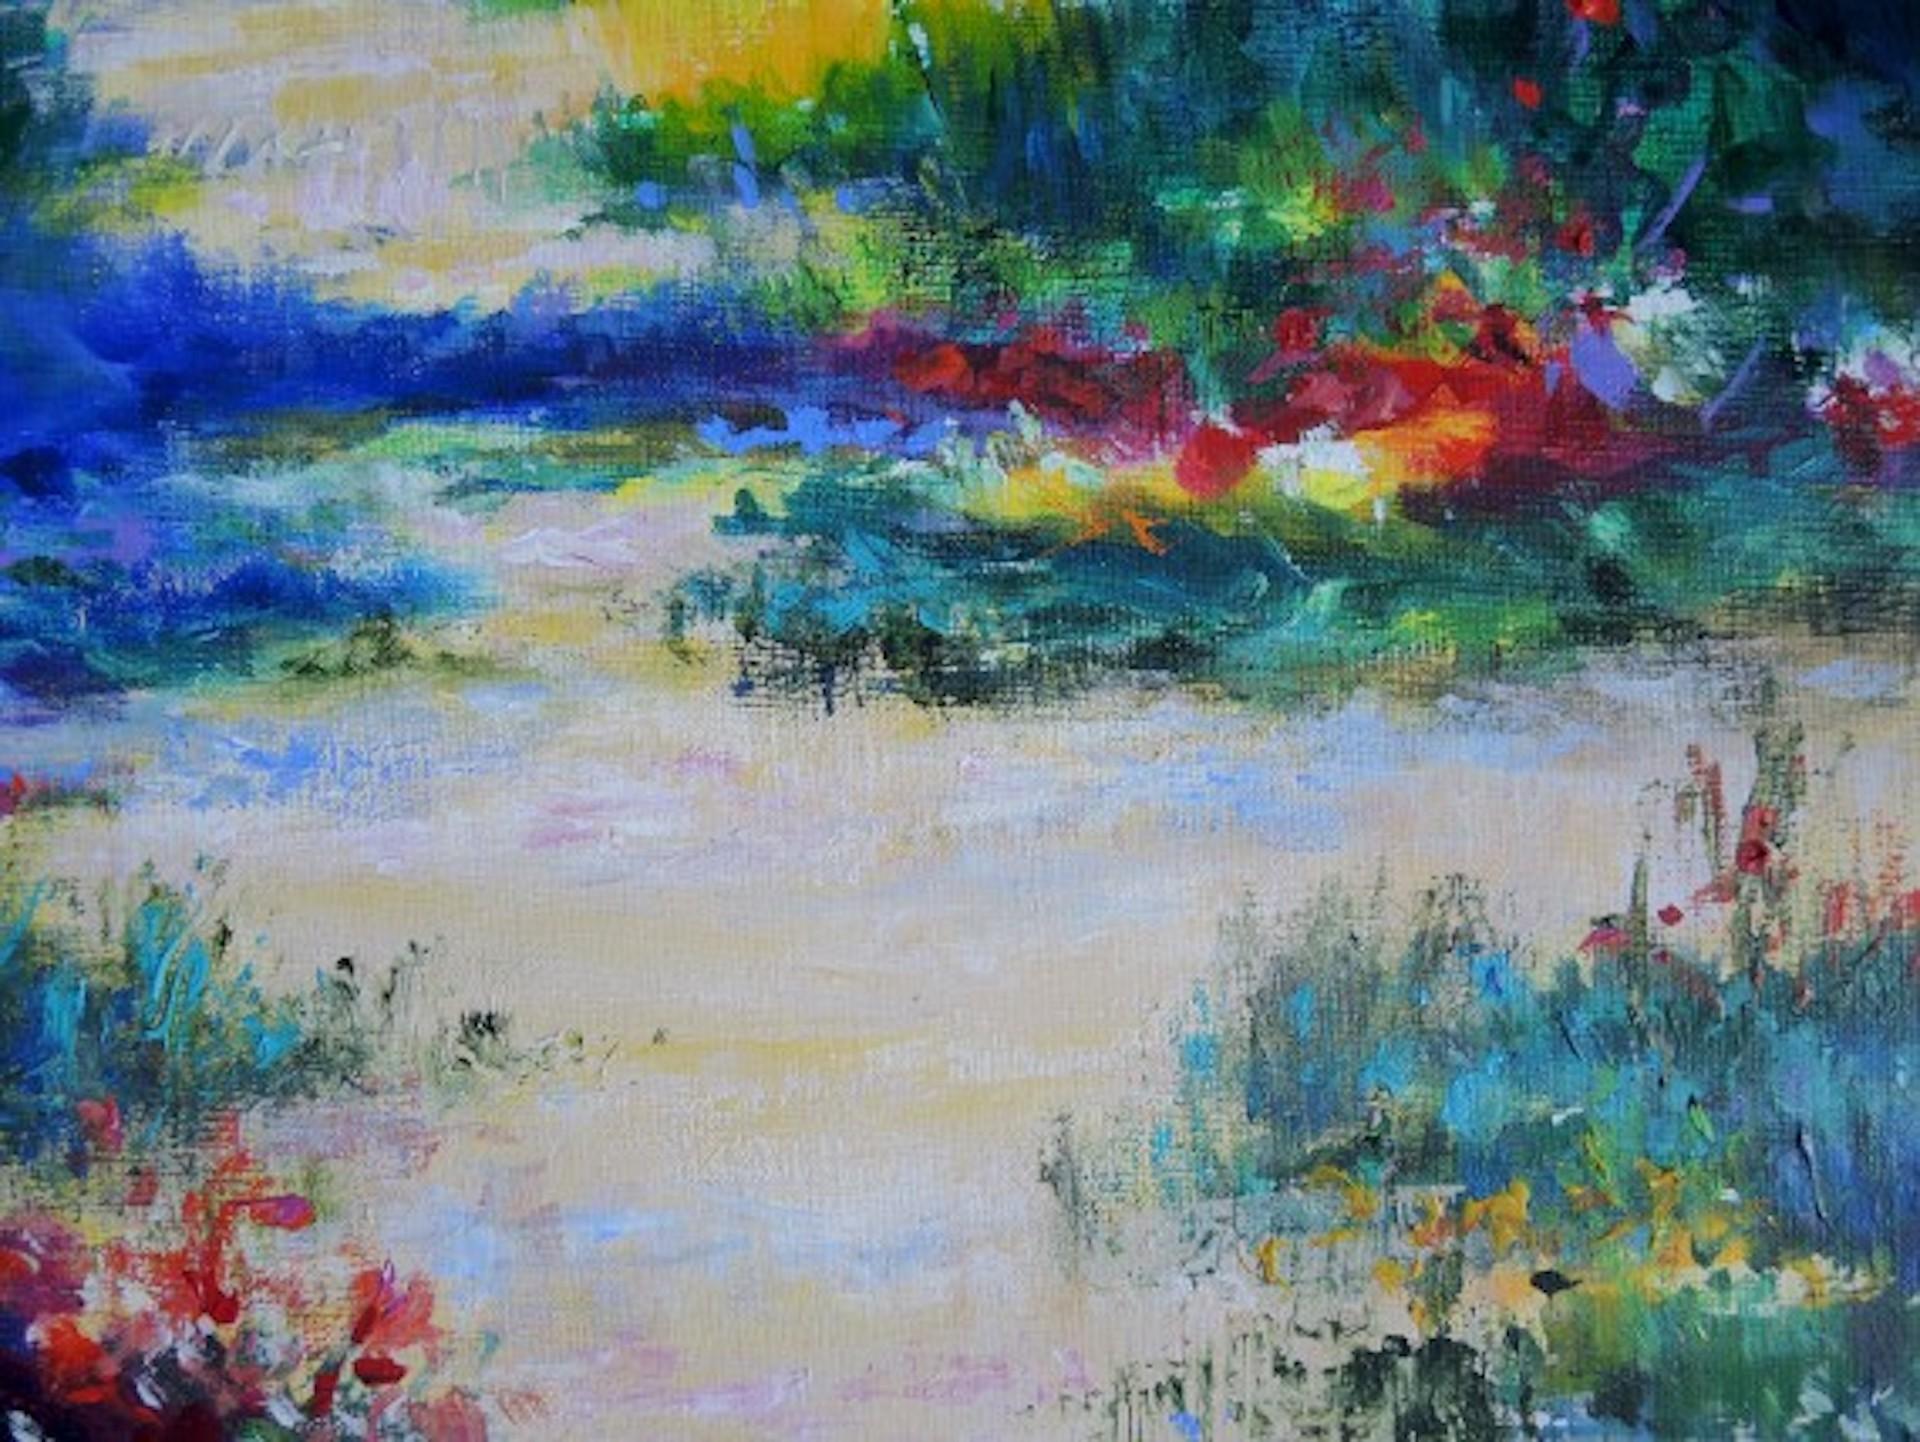 Full sun in Claude Monet’s garden [2021]
Original
Acrylic on canvas
Image size: H:80 cm x W:60 cm
Complete Size of Unframed Work: H:80 cm x W:60 cm x D:2cm
Sold Unframed
Please note that insitu images are purely an indication of how a piece may